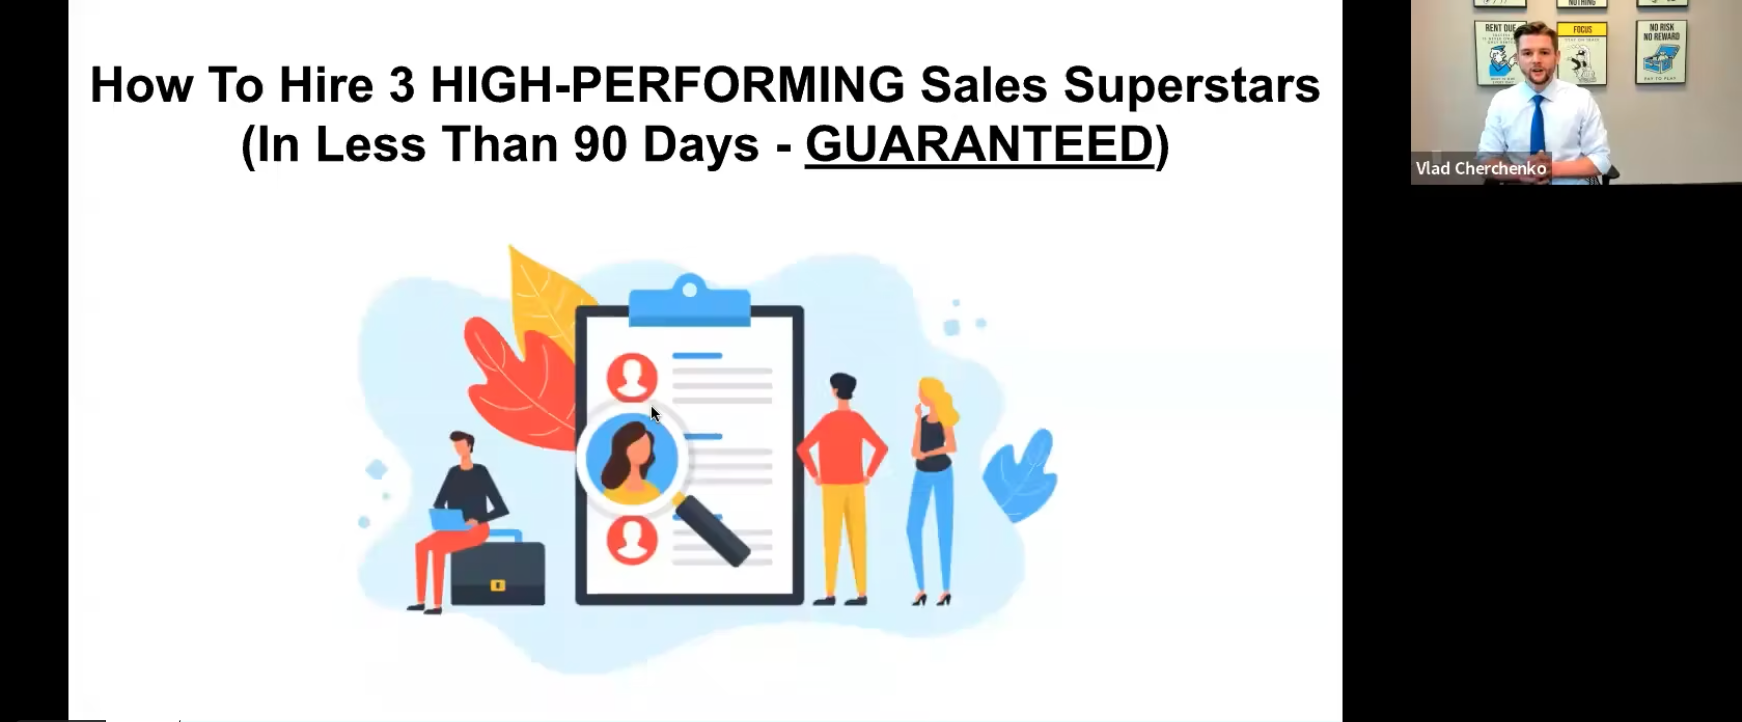 How To Hire 3 HIGH PERFORMING Sales Superstars In Less Than 90 Days (GUARANTEED) with Vlad Cherchenko